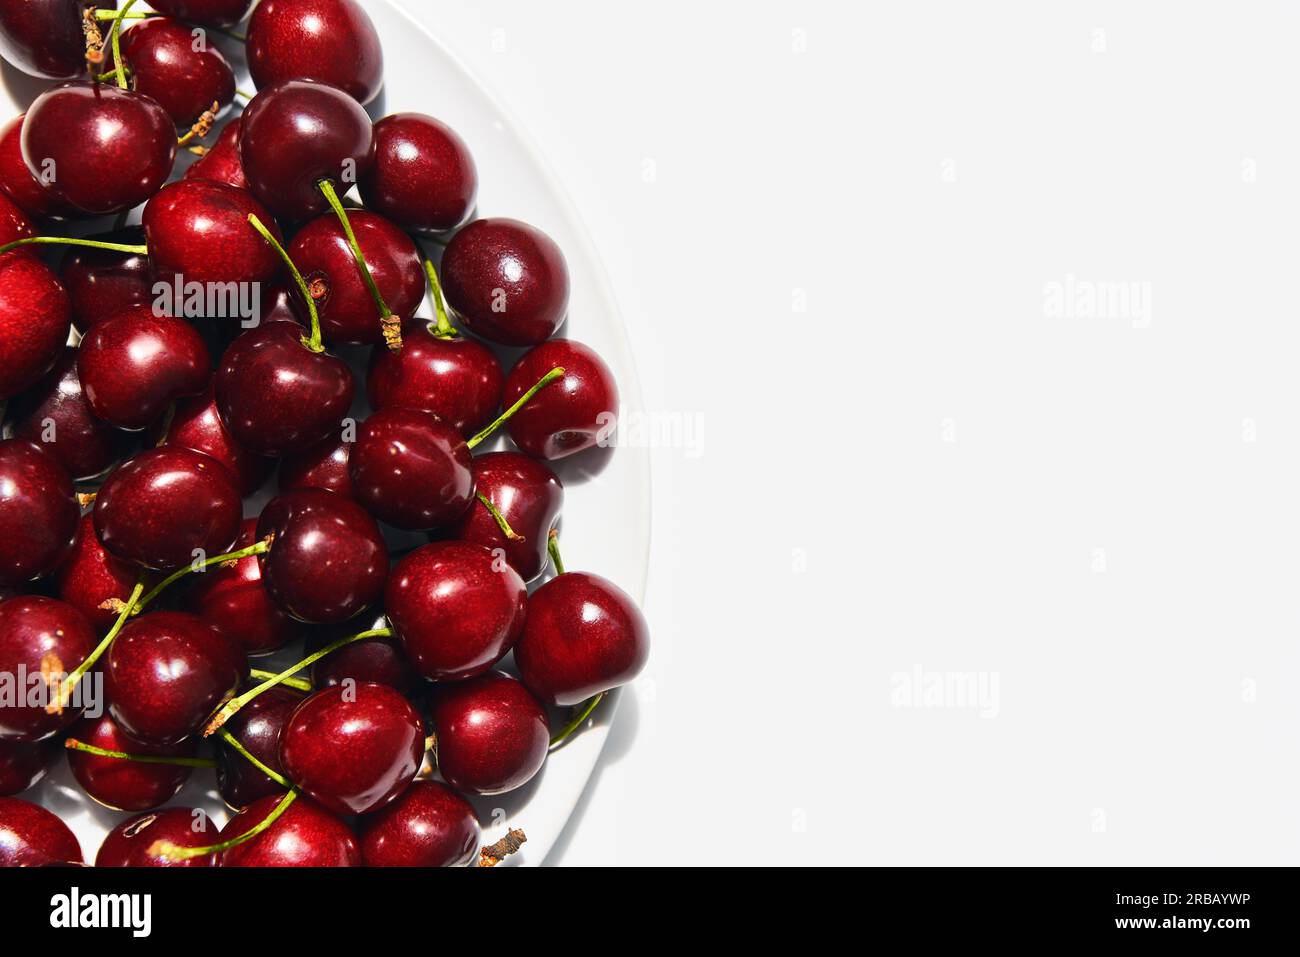 Ripe sweet cherries on plate isolated on white background with copy space. Healthy food, summer concept Stock Photo